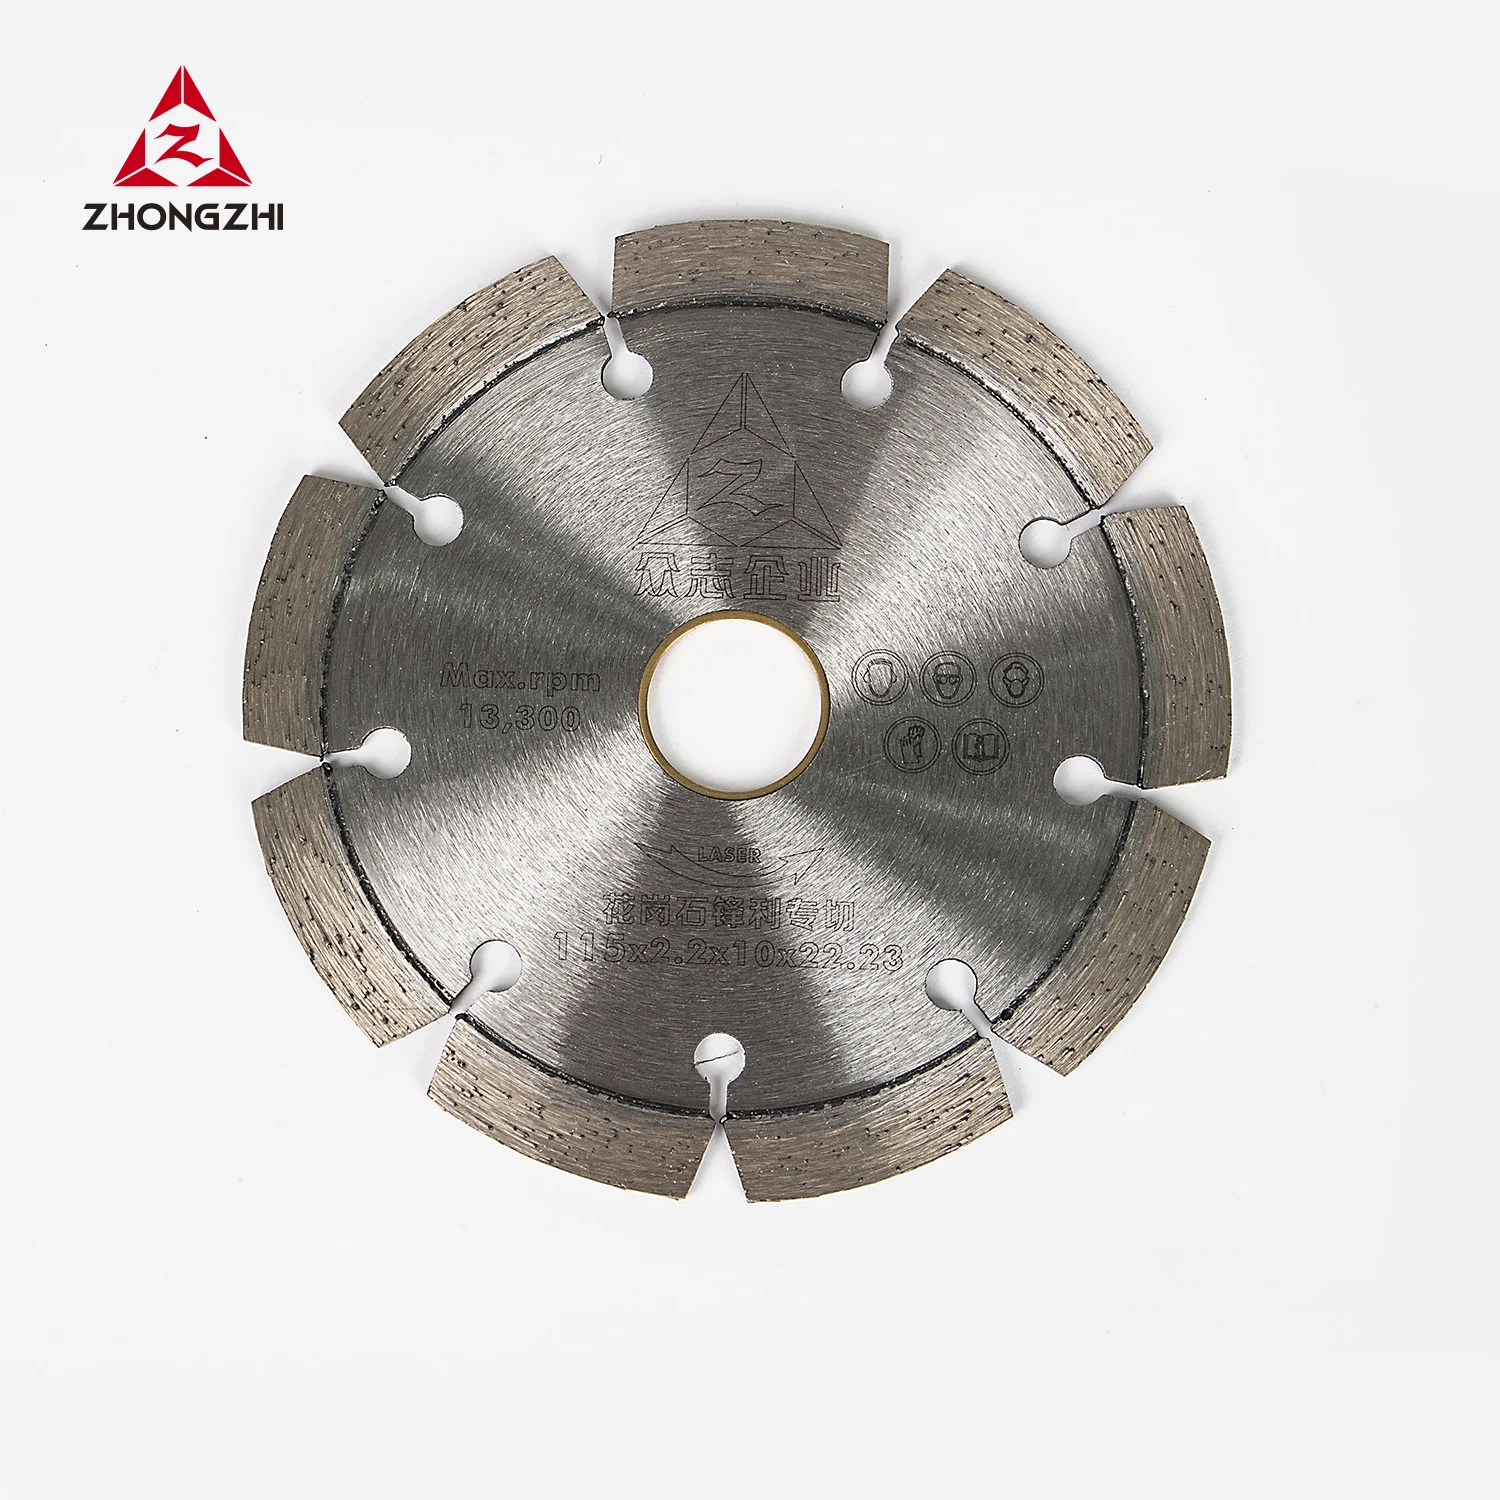 

114mm Hot Pressed Sintered Segmented Diamond Dry Cutters for Granite Natural Stones with Smooth Cutting, Upon request